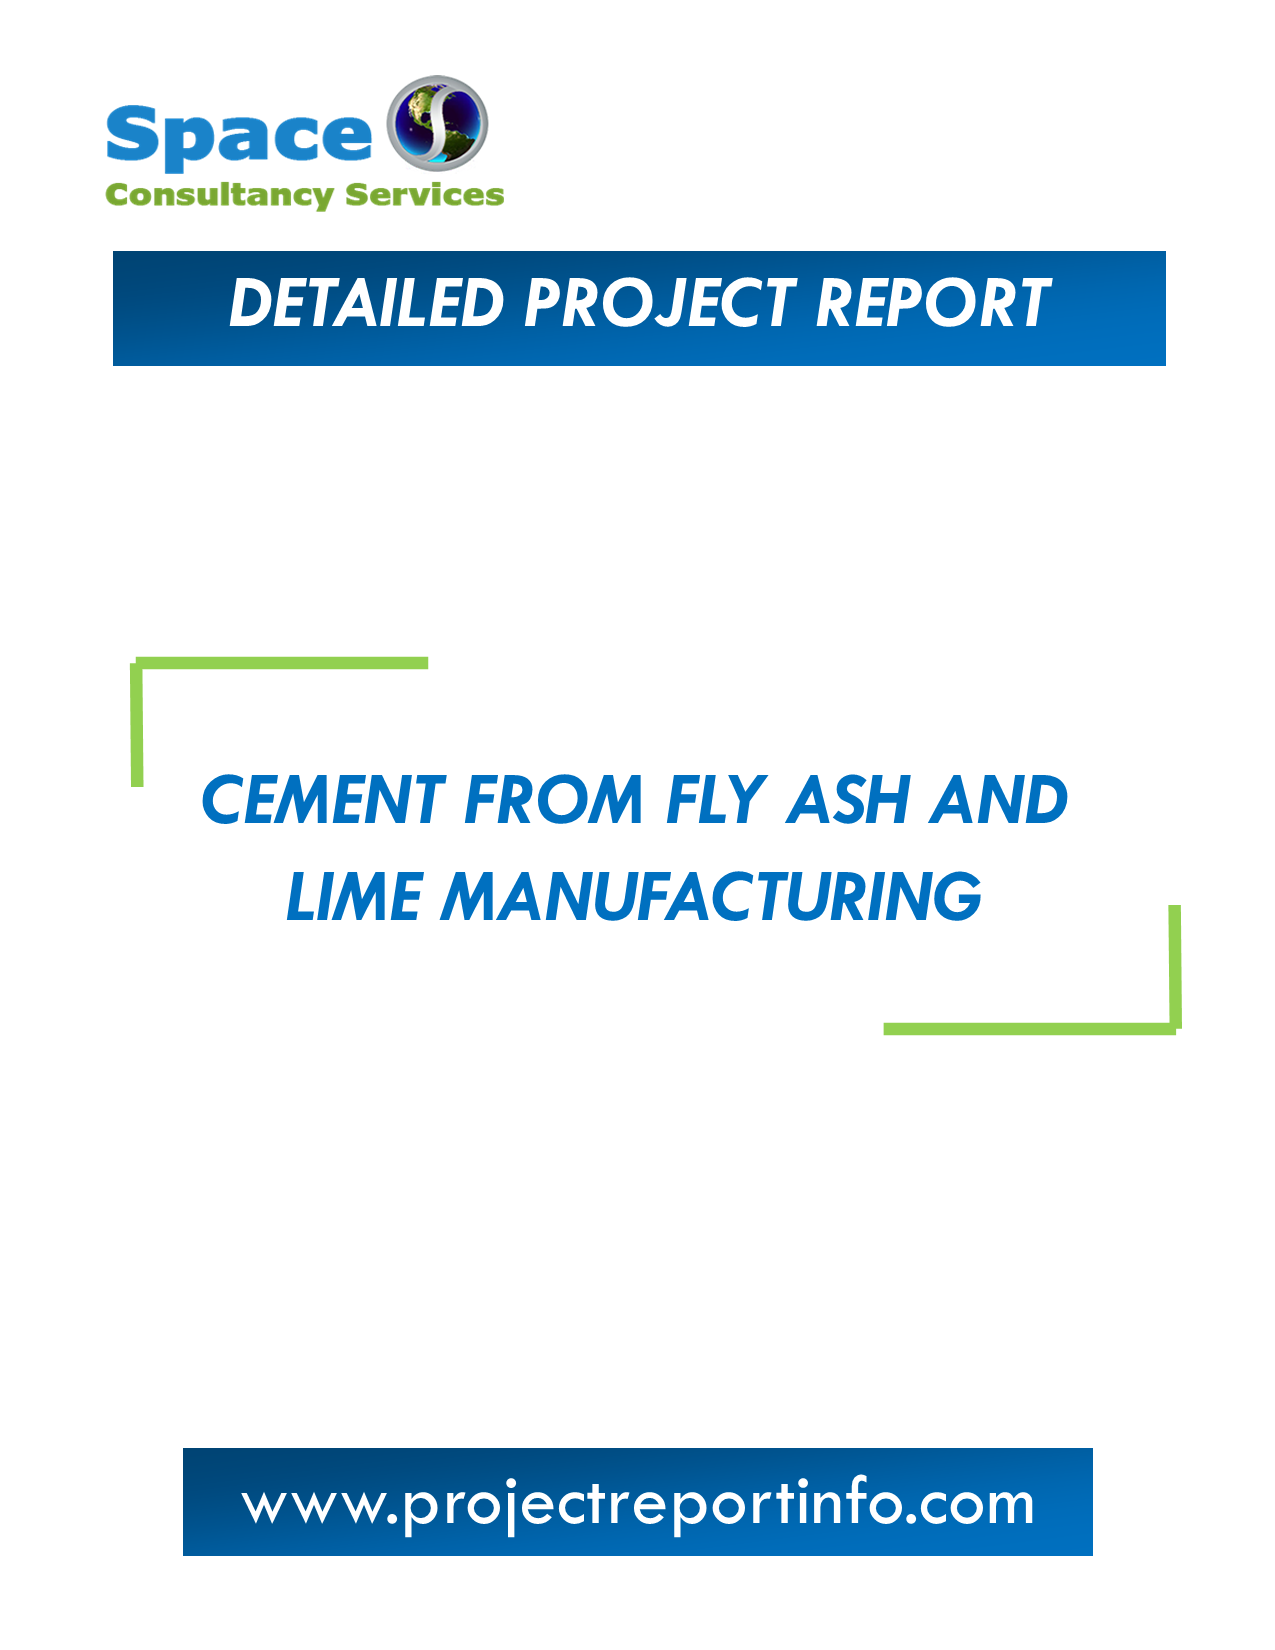 Project Report on Cement from Fly Ash and Lime Manufacturing